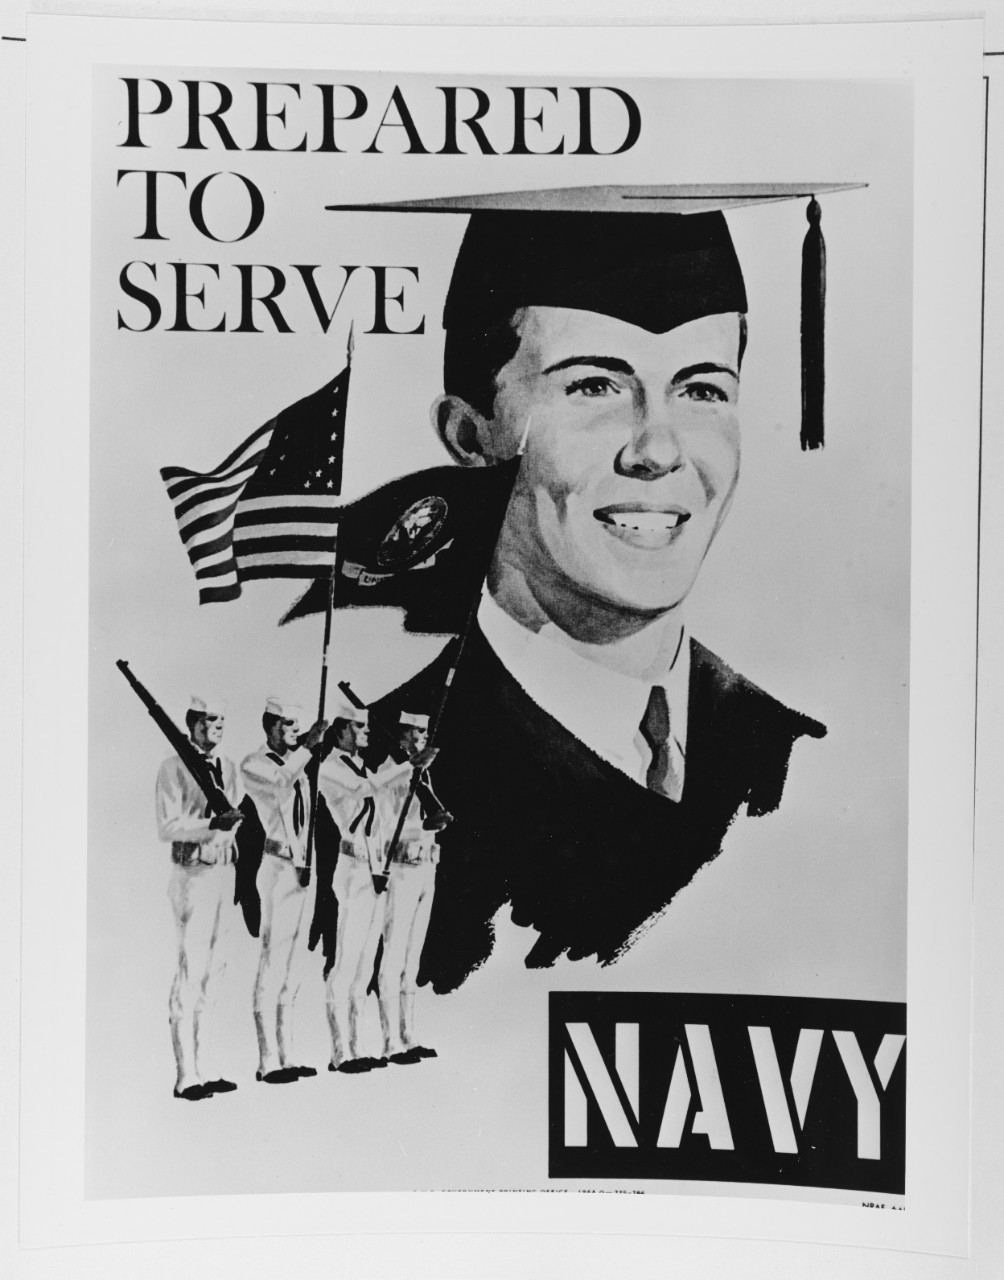 Navy recruiting poster:  "Prepared to serve"